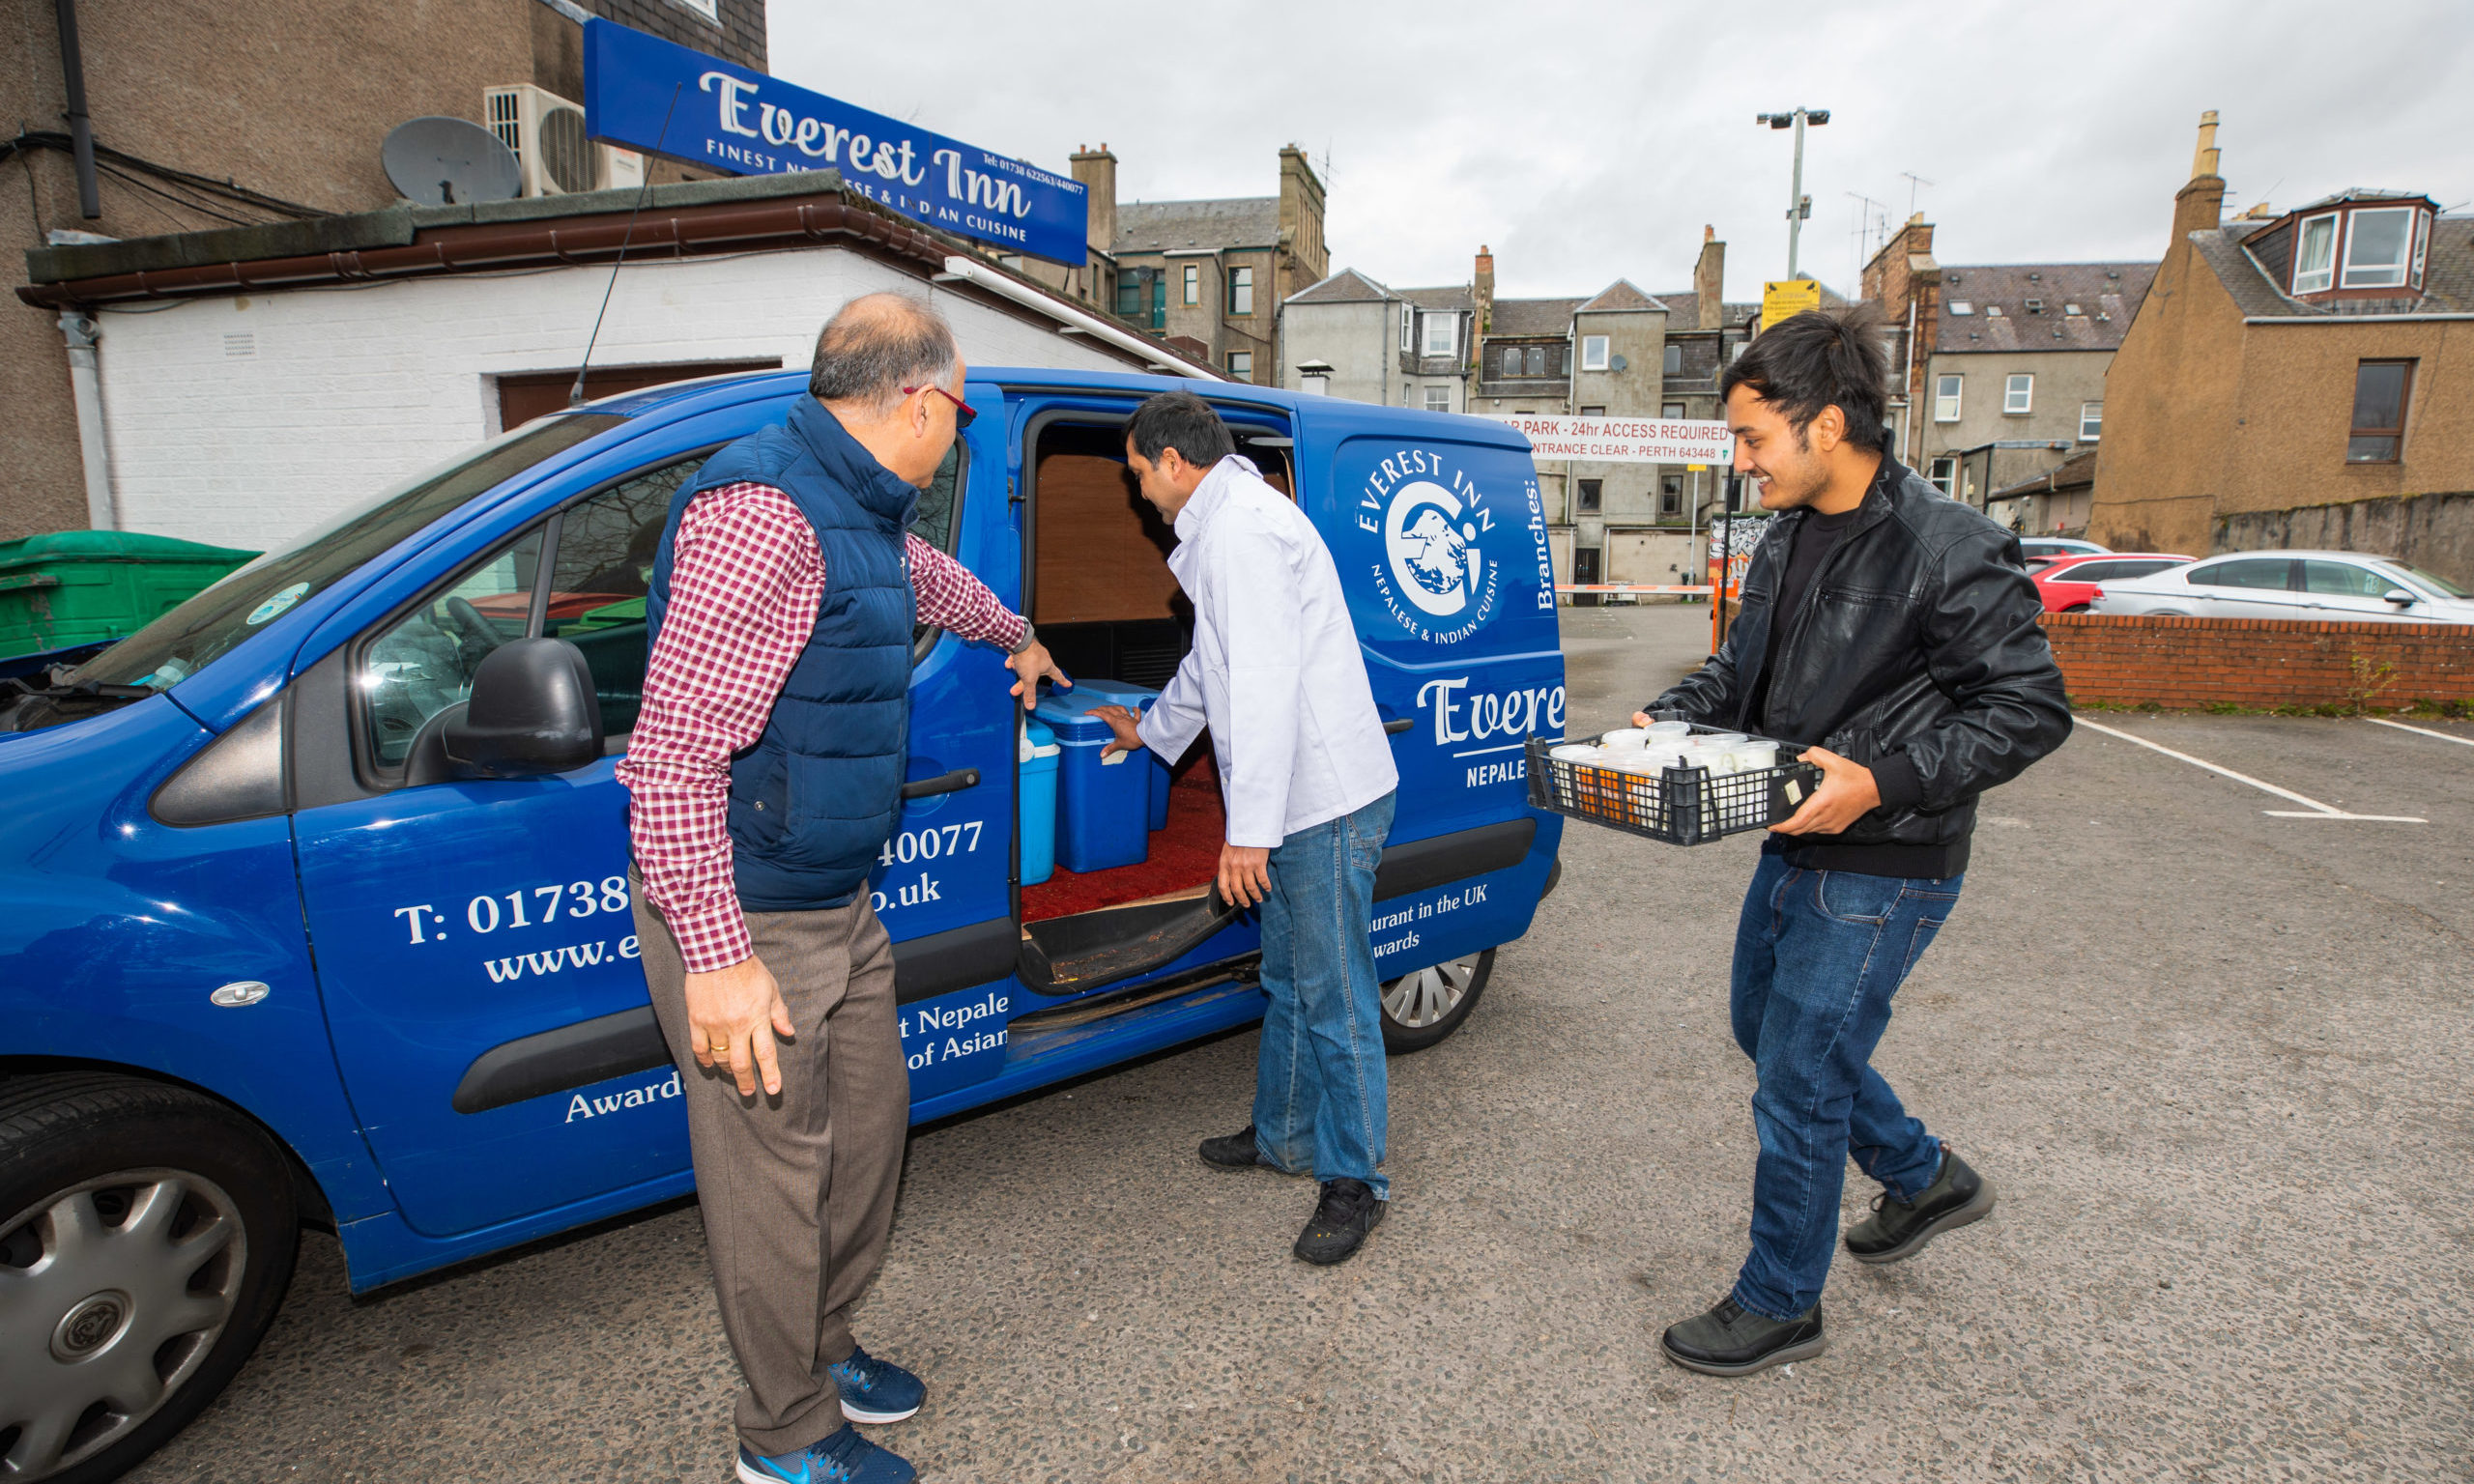 The Everest Inn and Tabla staff have been donating meals to PRI.